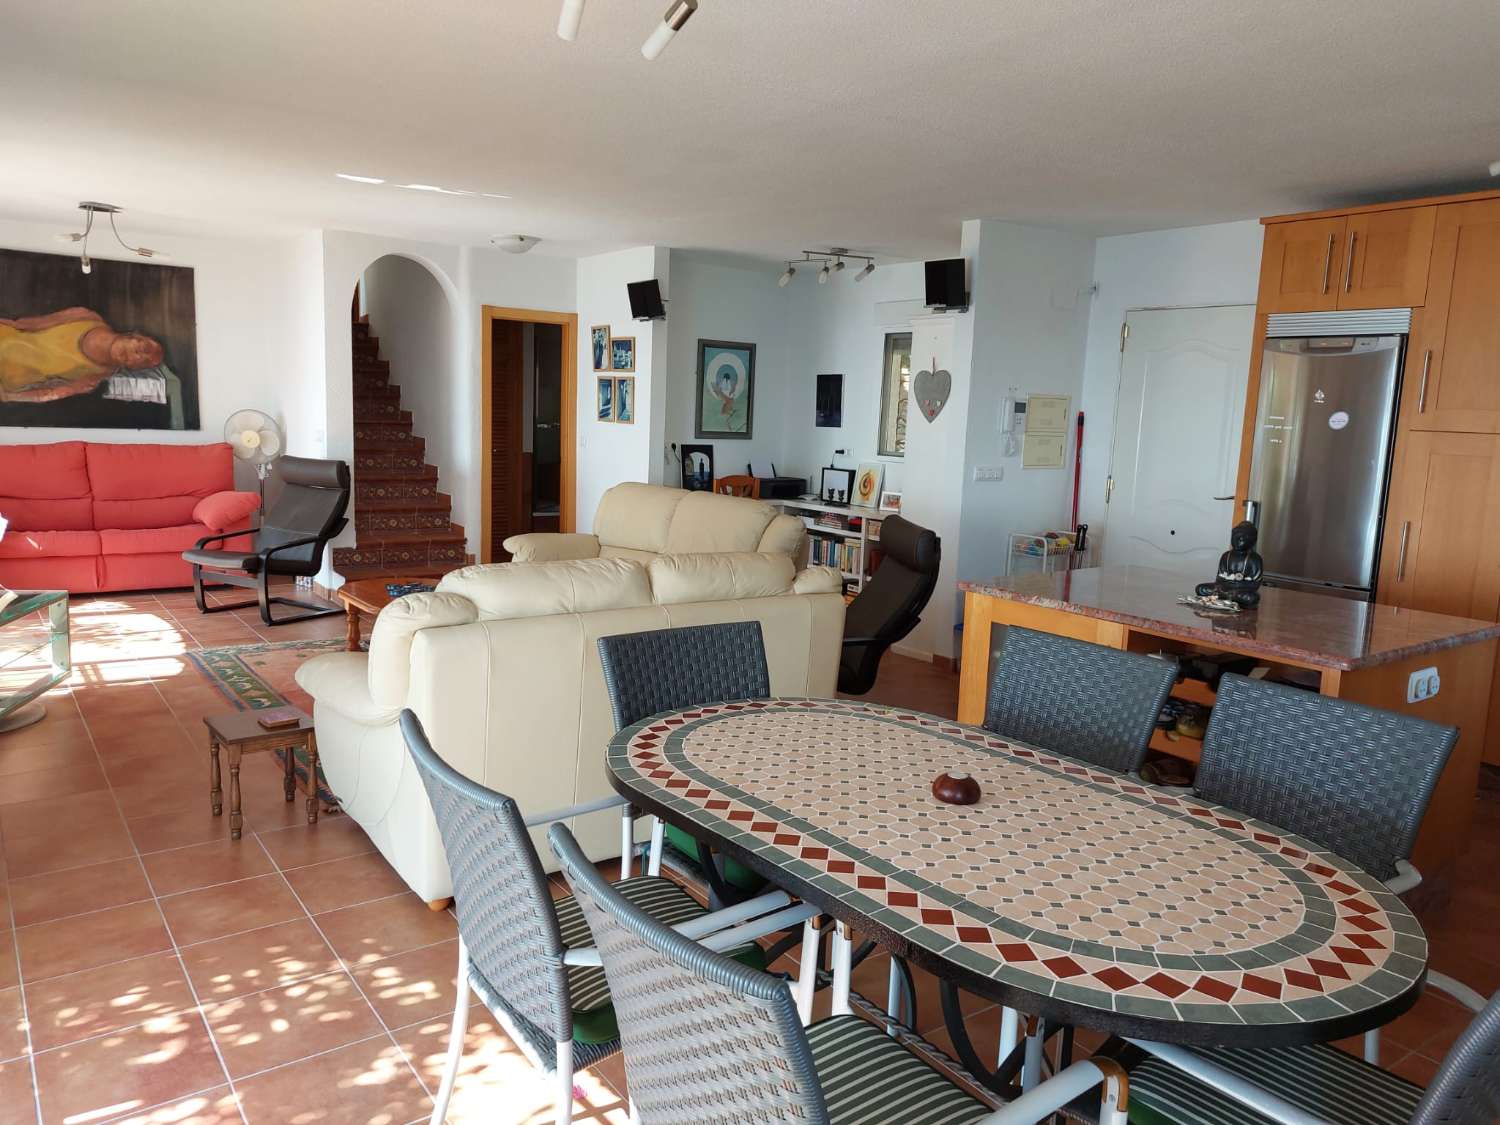 Wonderful villa for sale with private pool, mature gardens and panoramic sea views